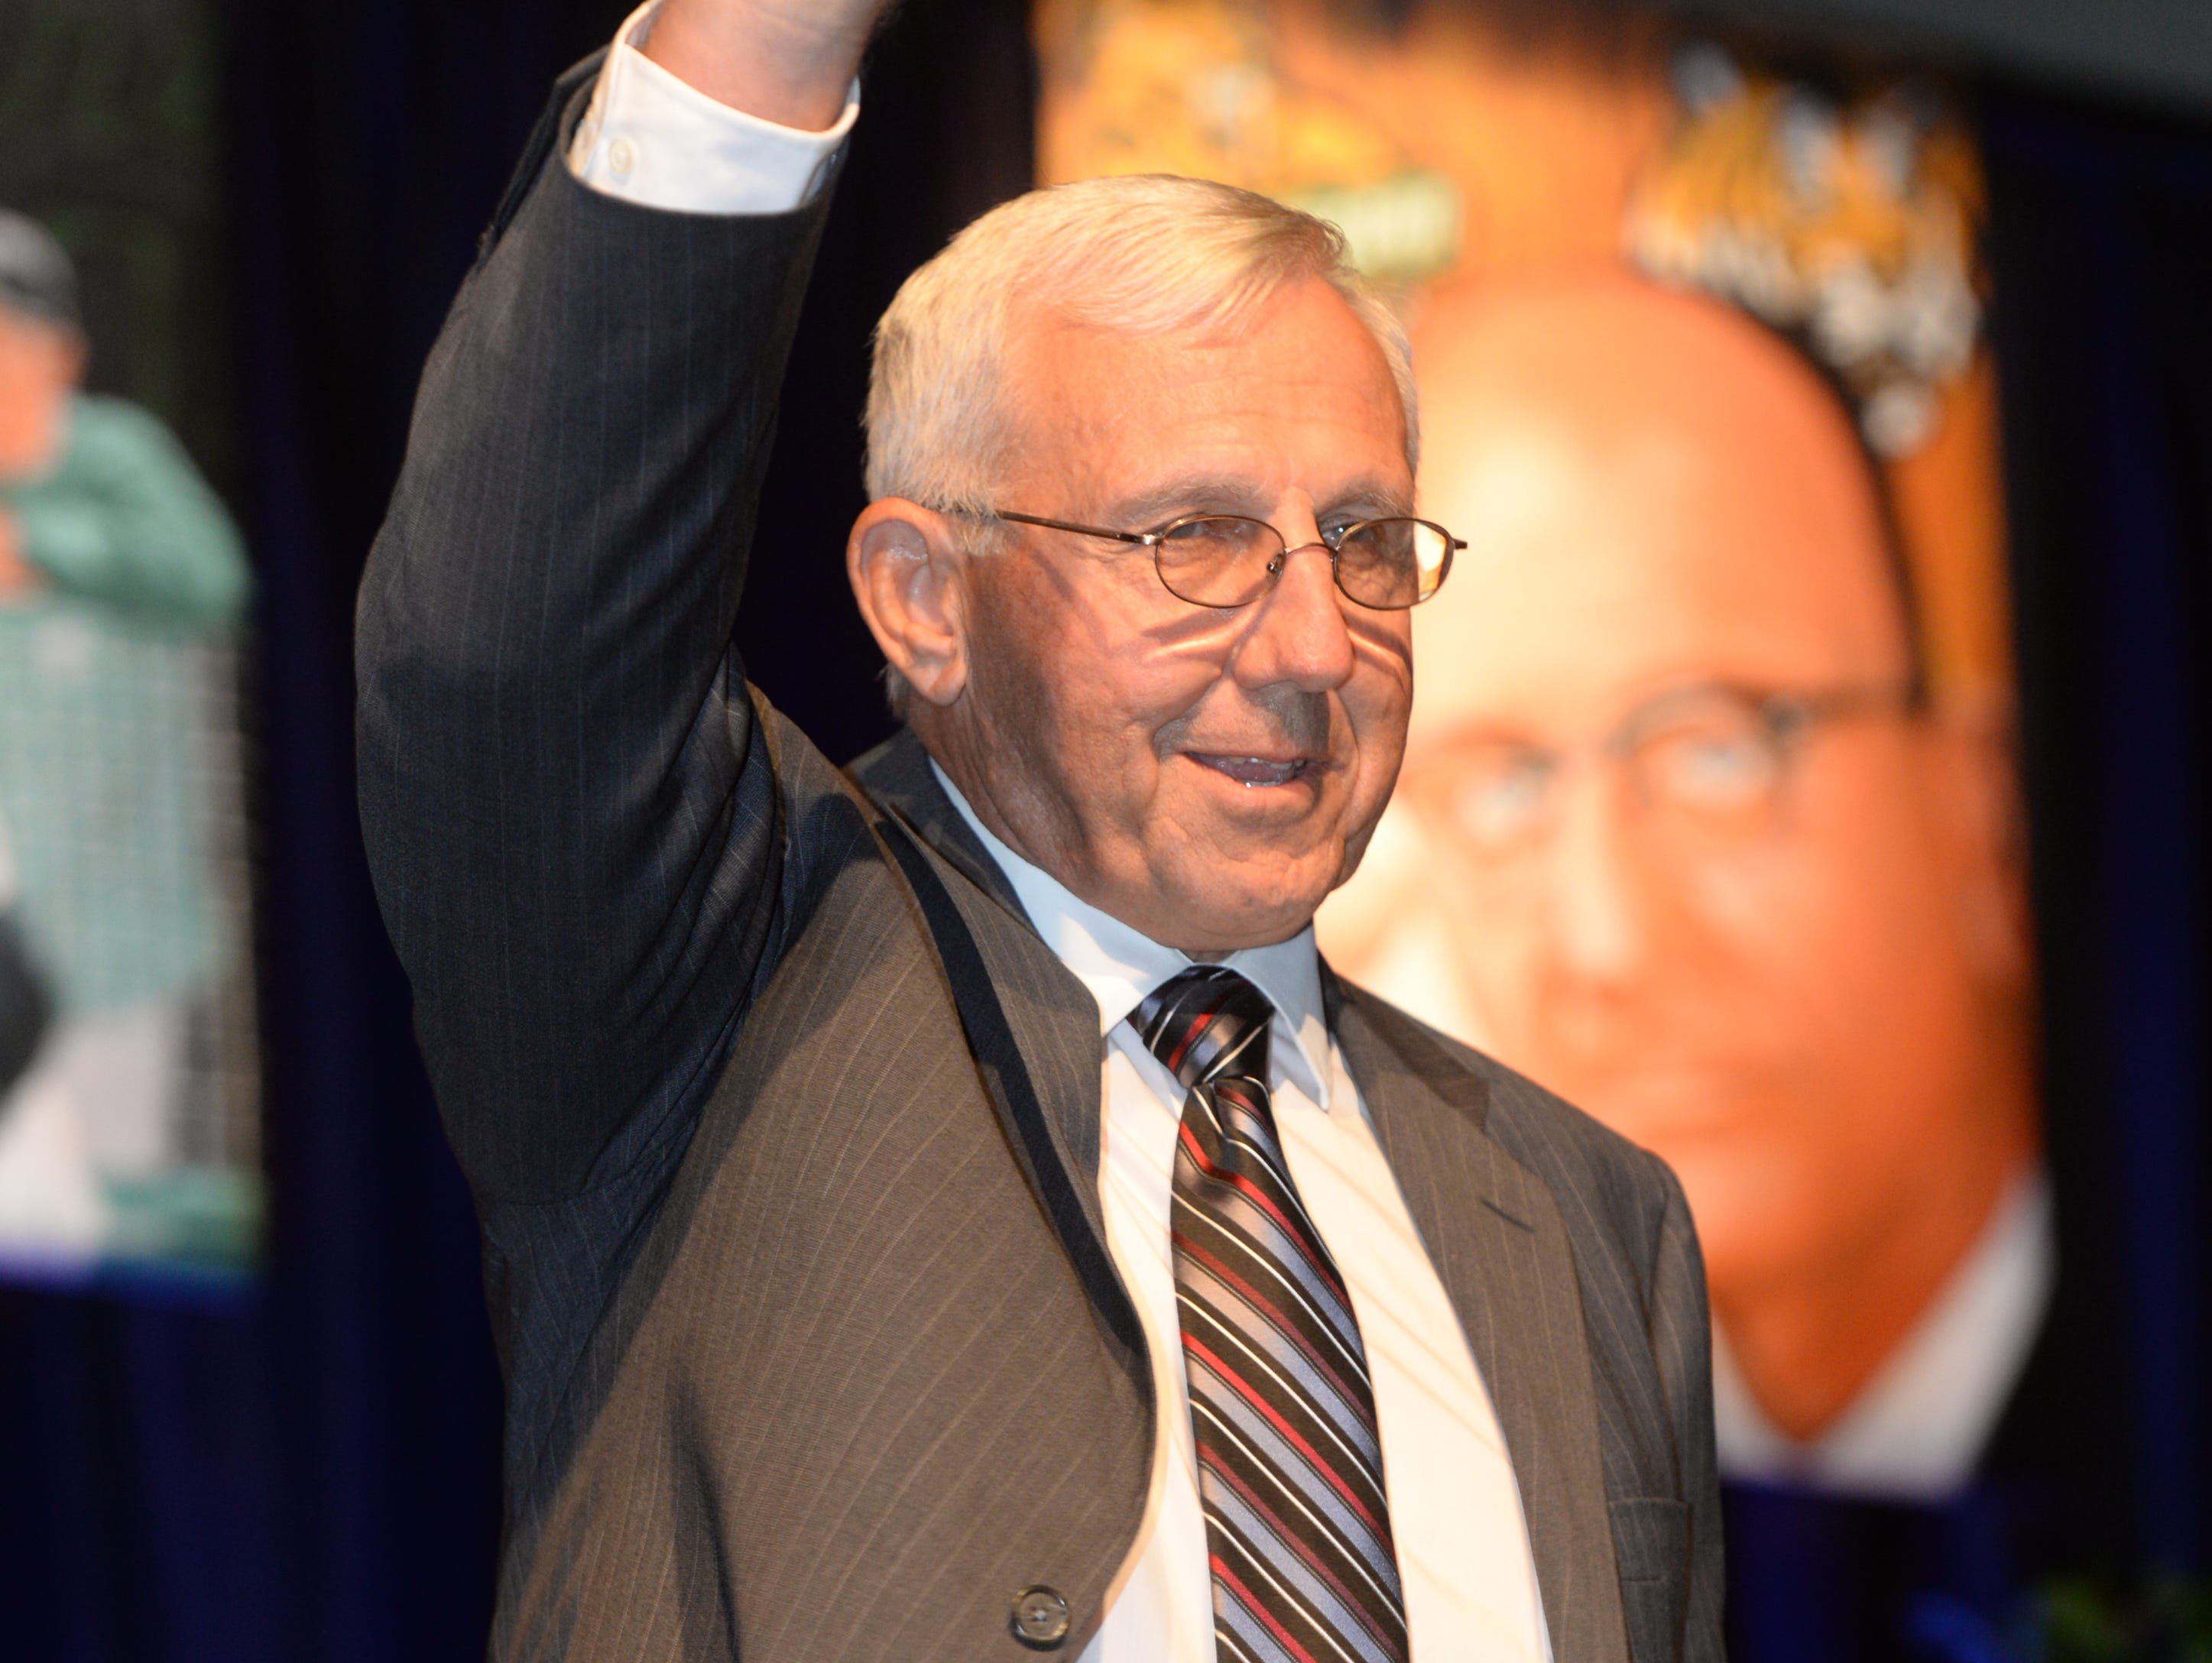 Jim Hightower waves as he walks up on stage during his induction into the 2016 Louisiana Sports Hall of Fame.